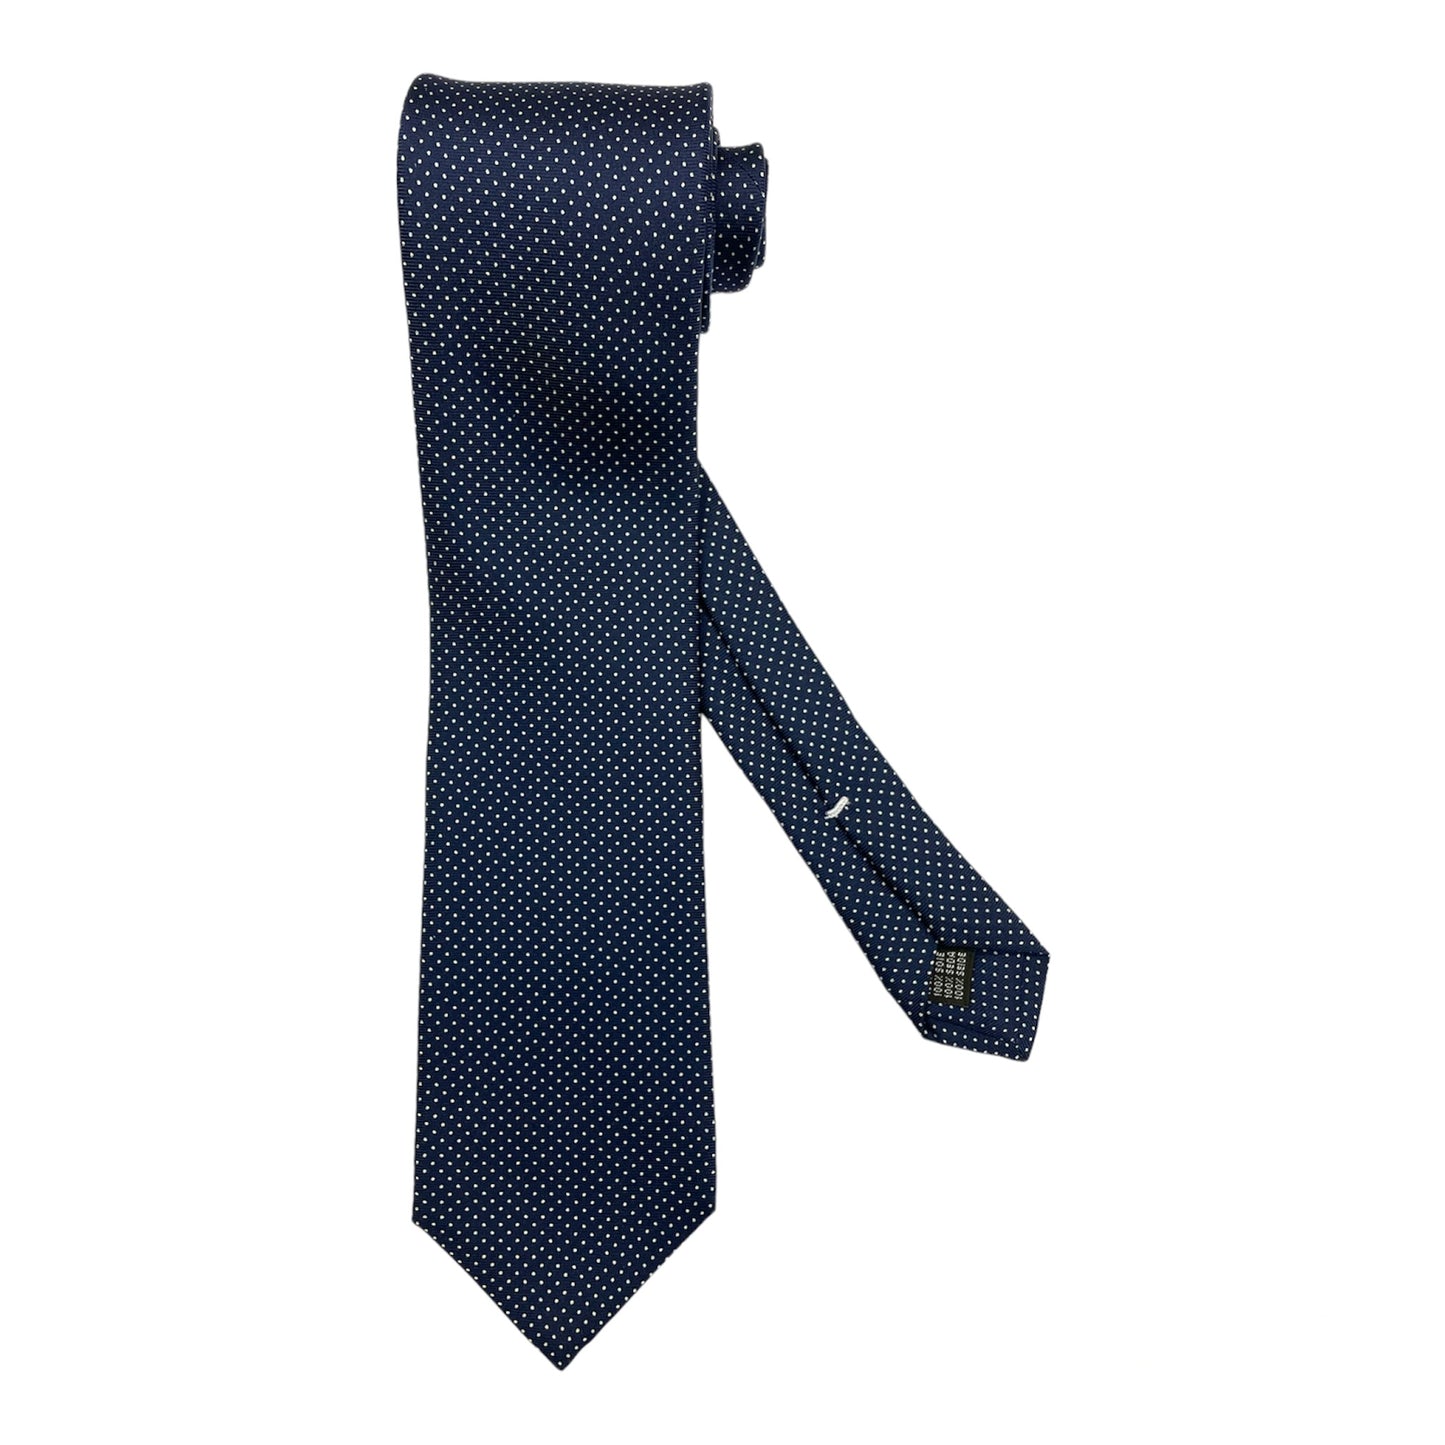 Blue silk tie with white pin point